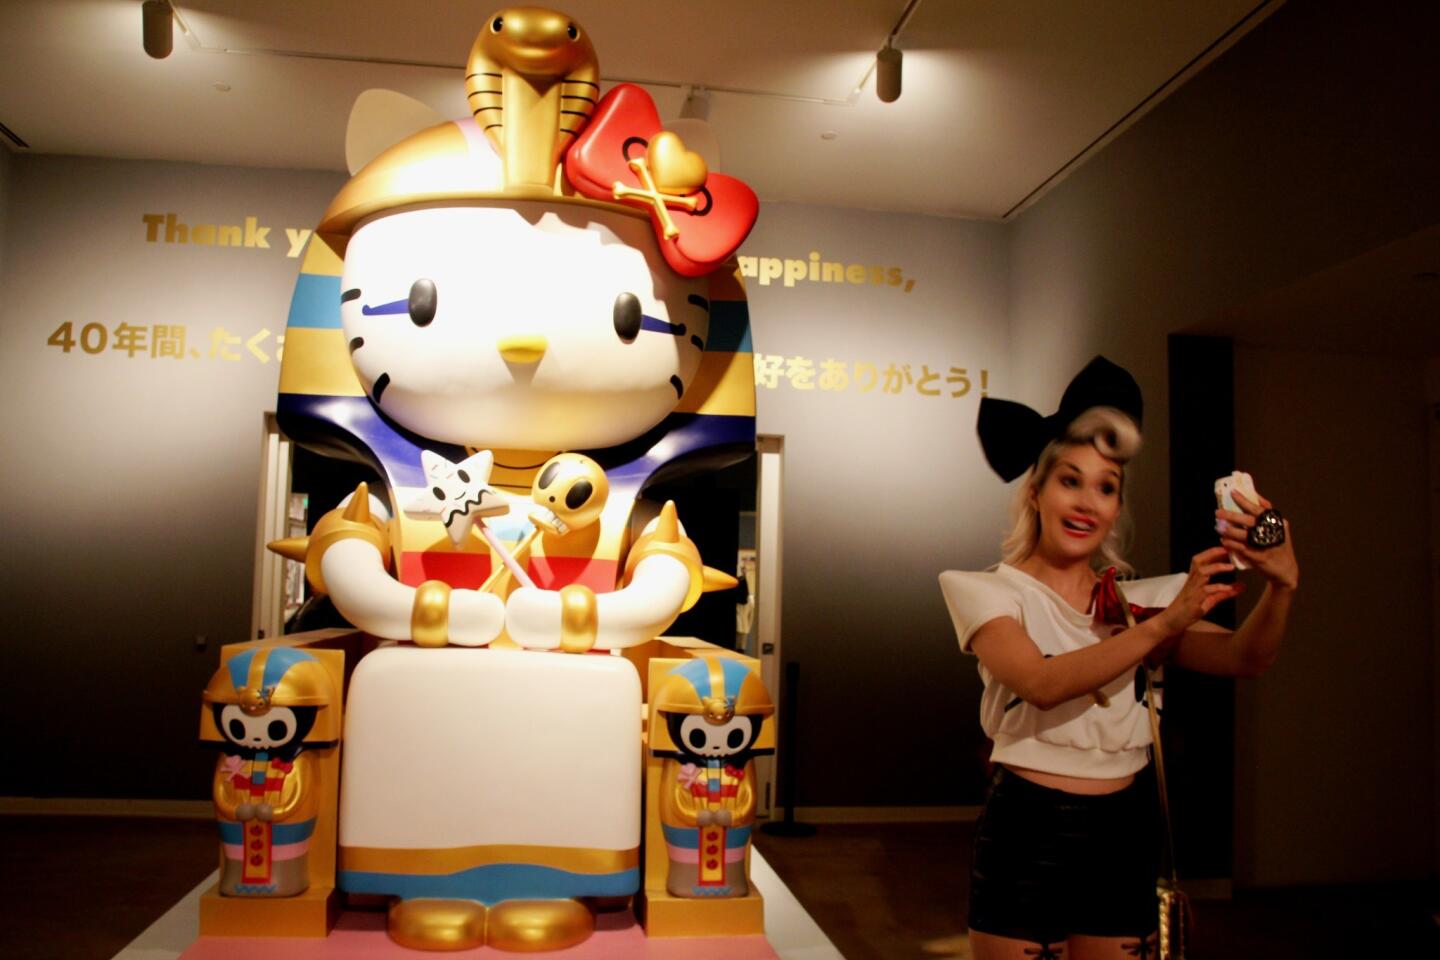 On Friday evening, members of the Japanese American National Museum, along with invited guests, arrived to party (and take selfies) with Hello Kitty.